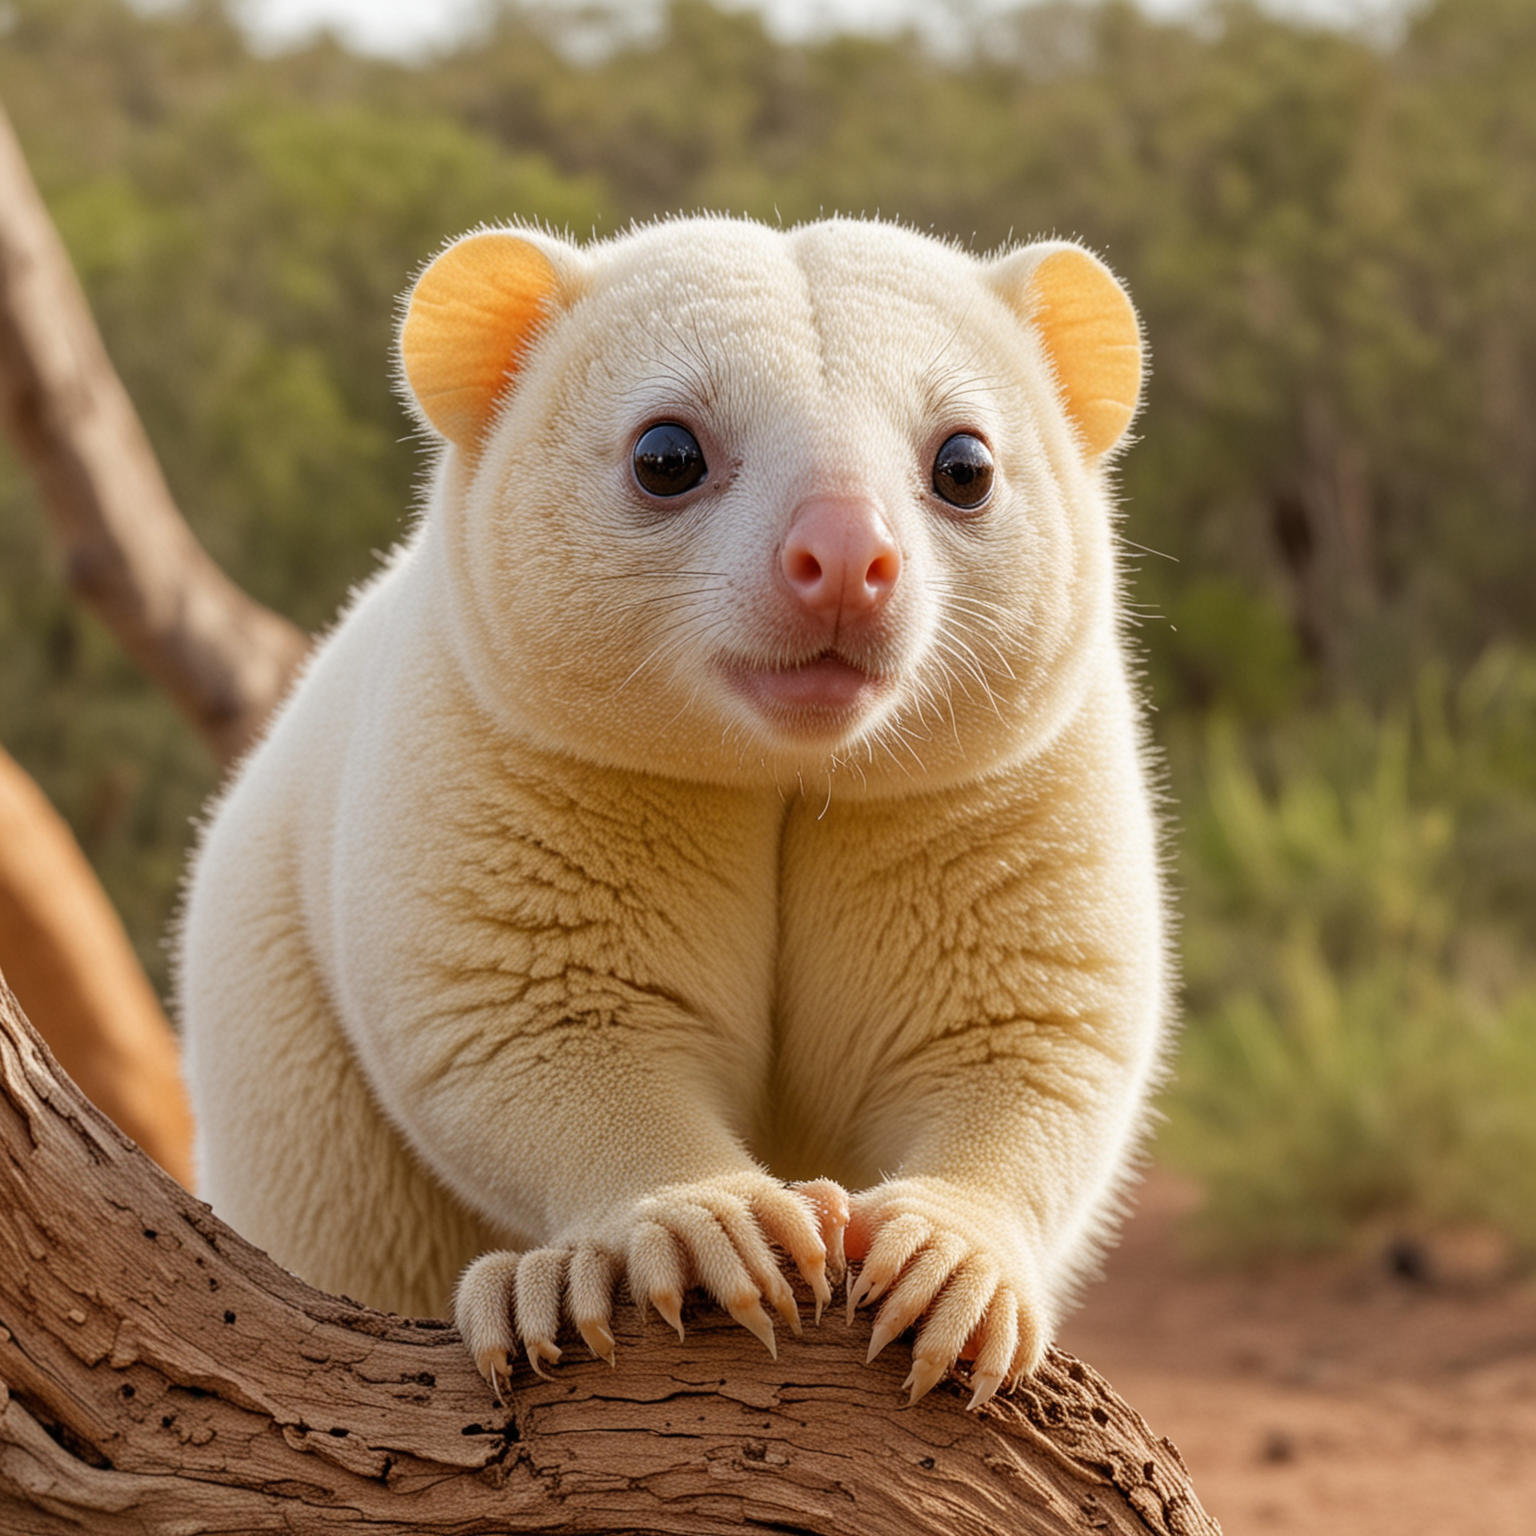 Australian Outback LightColored Cuscus Amidst Natural Beauty